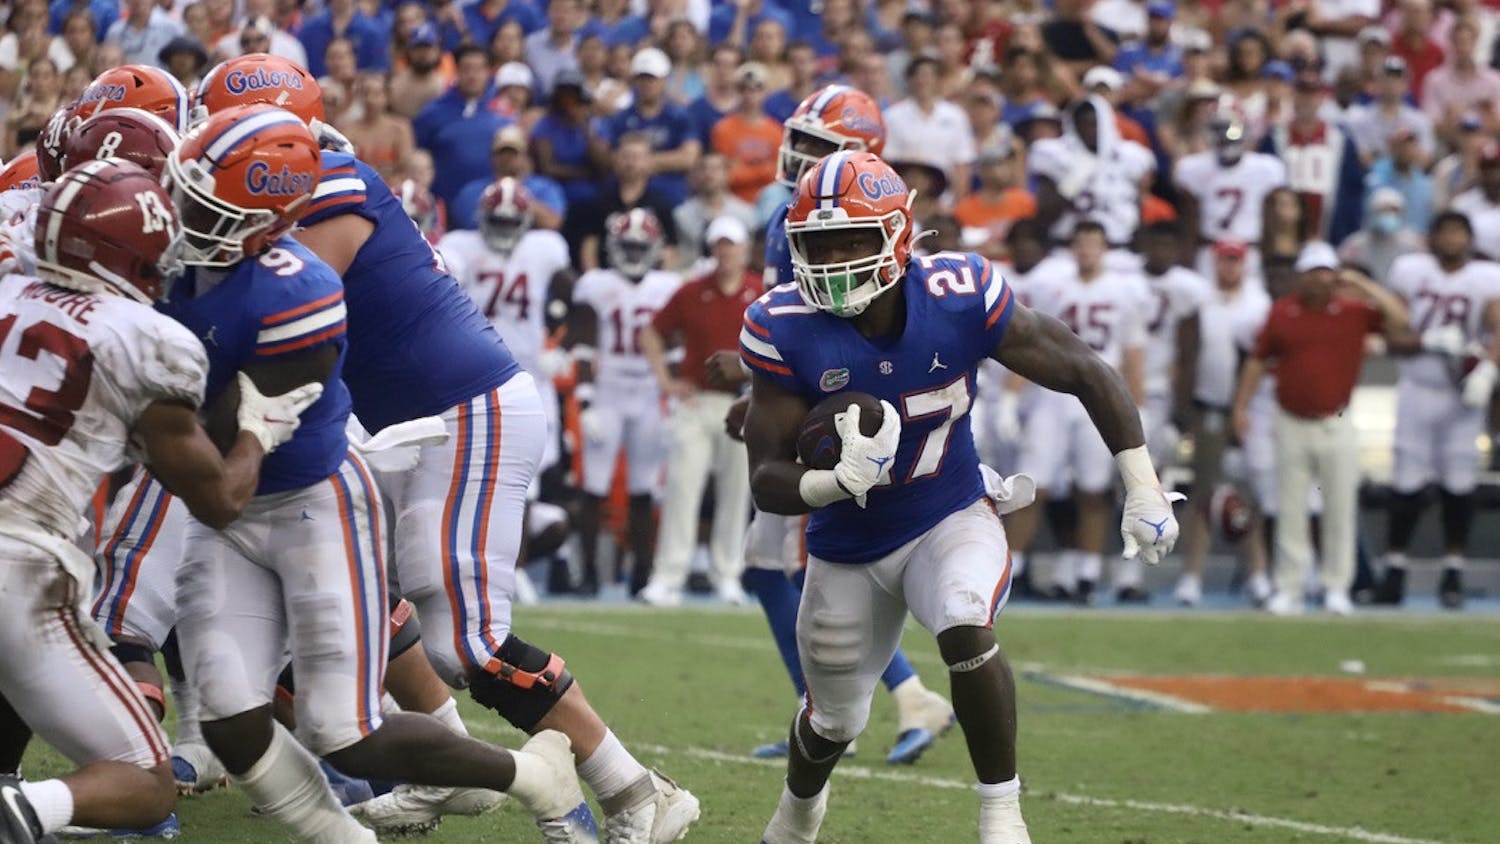 Florida's Dameon Pierce rushes toward the edge of his offensive line against No. 1 Alabama on Sept. 18, 2021.